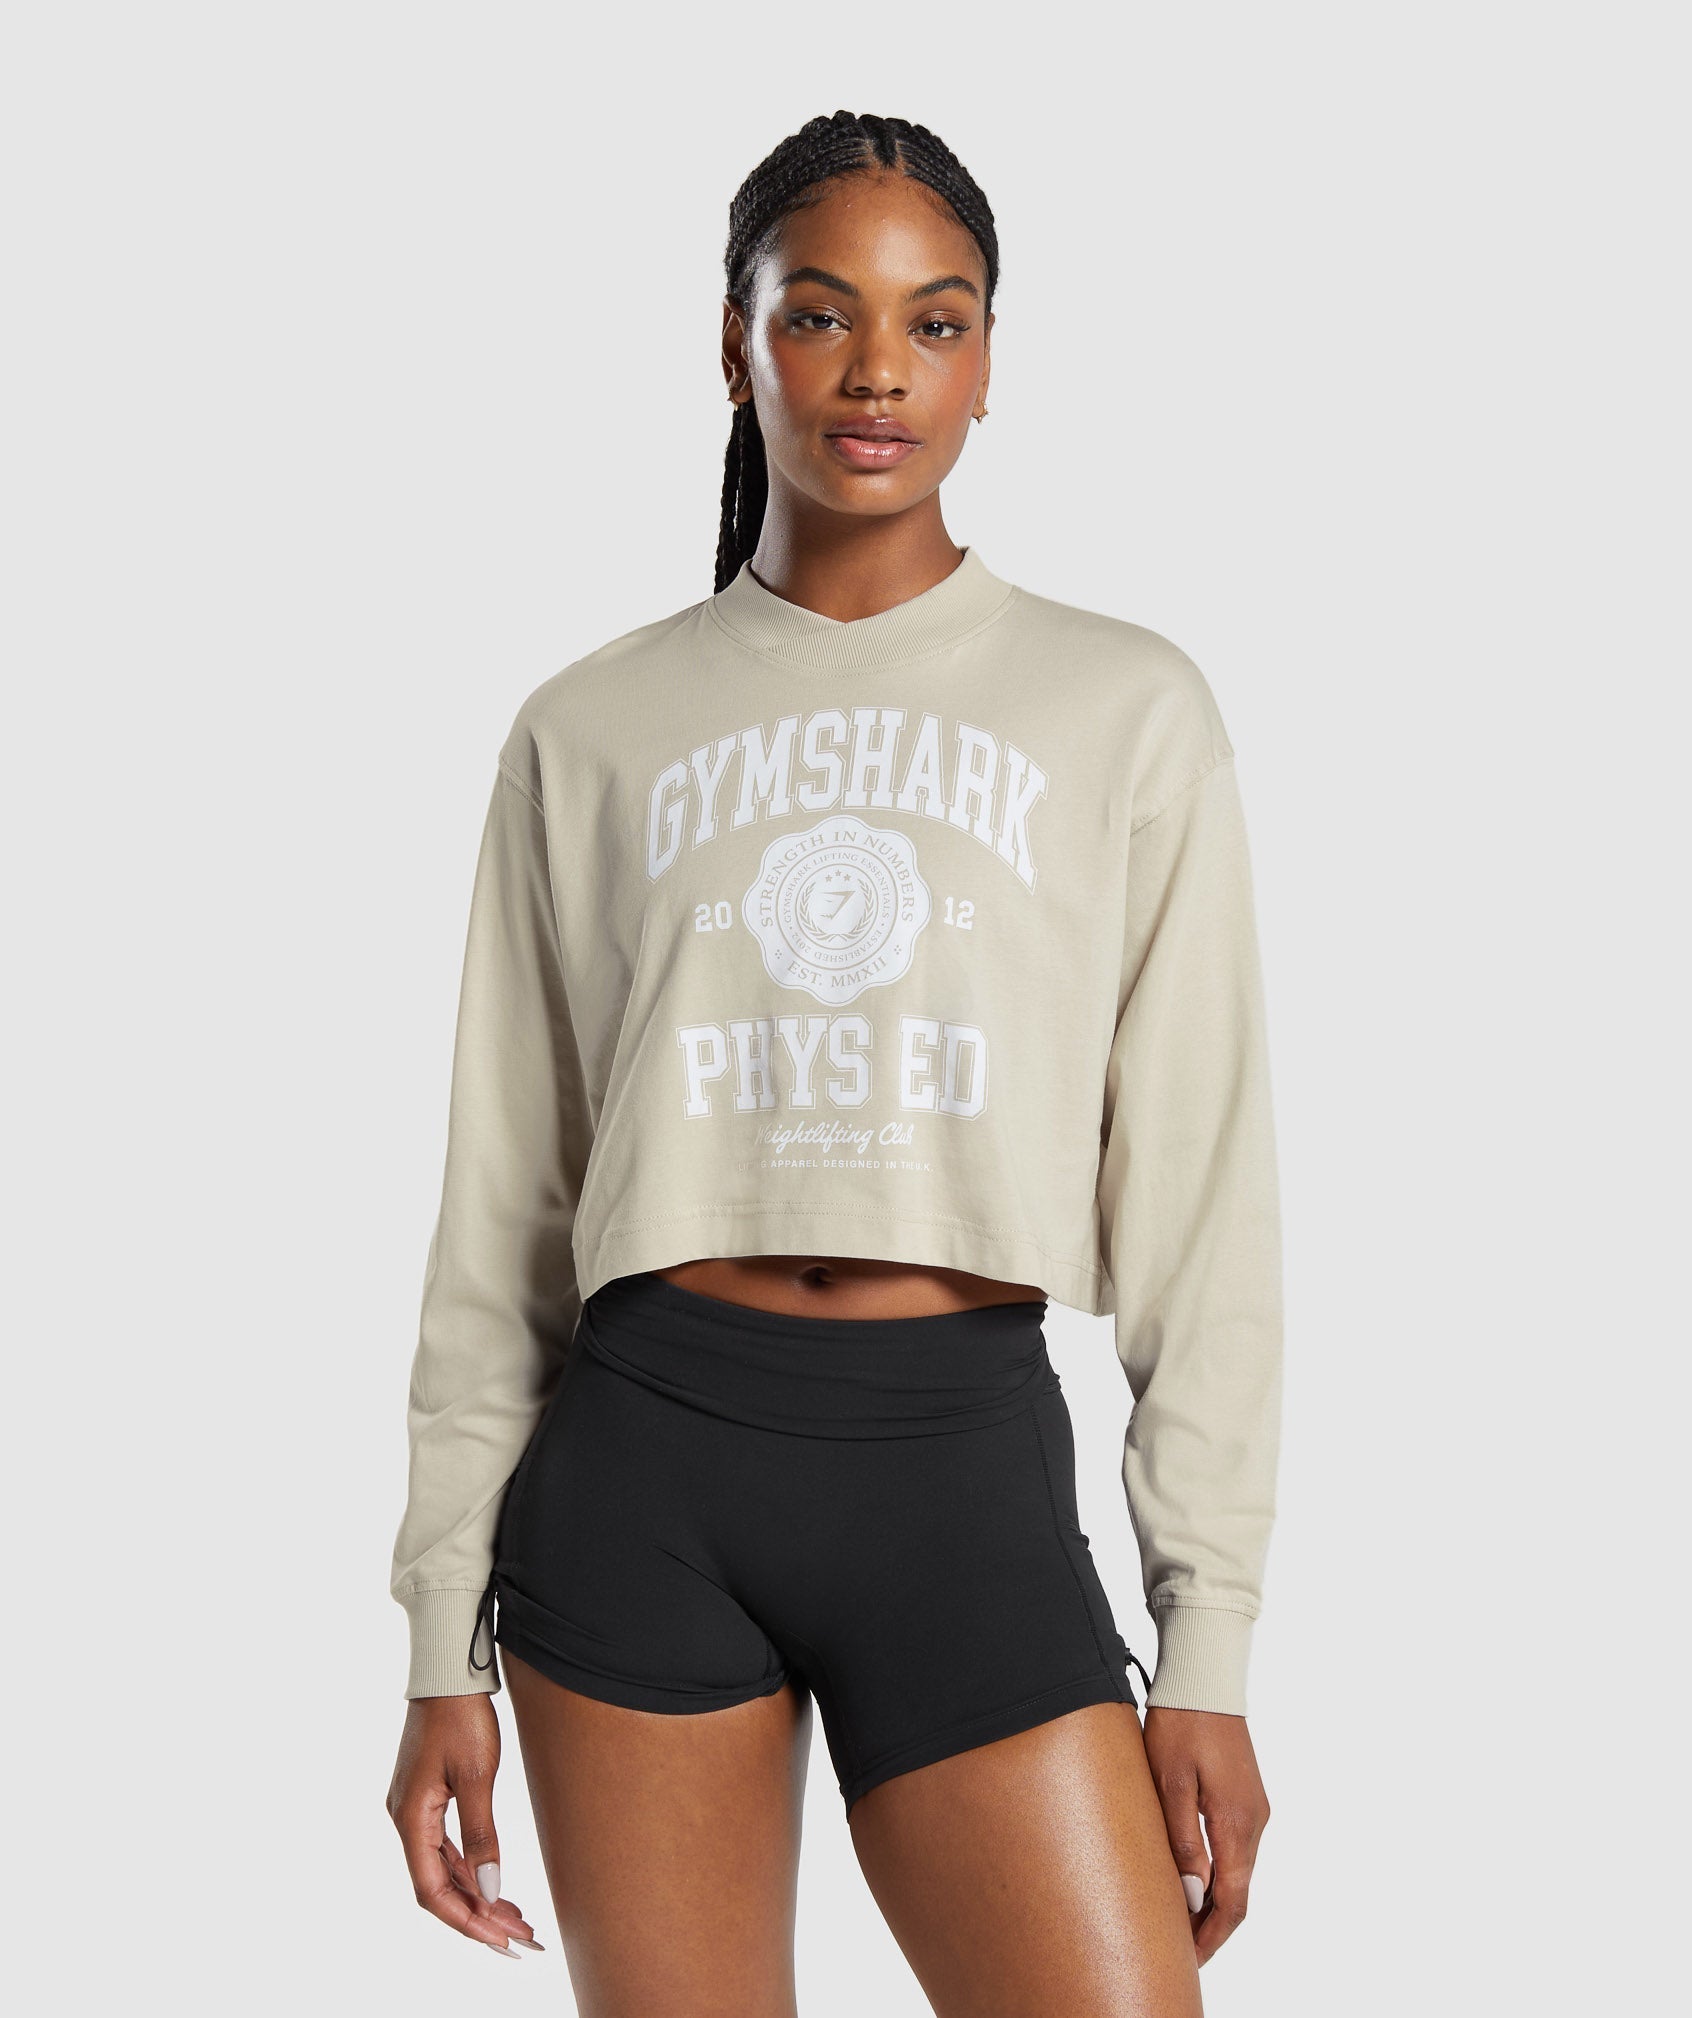 Phys Ed Graphic Long Sleeve T-Shirt in Pebble Grey